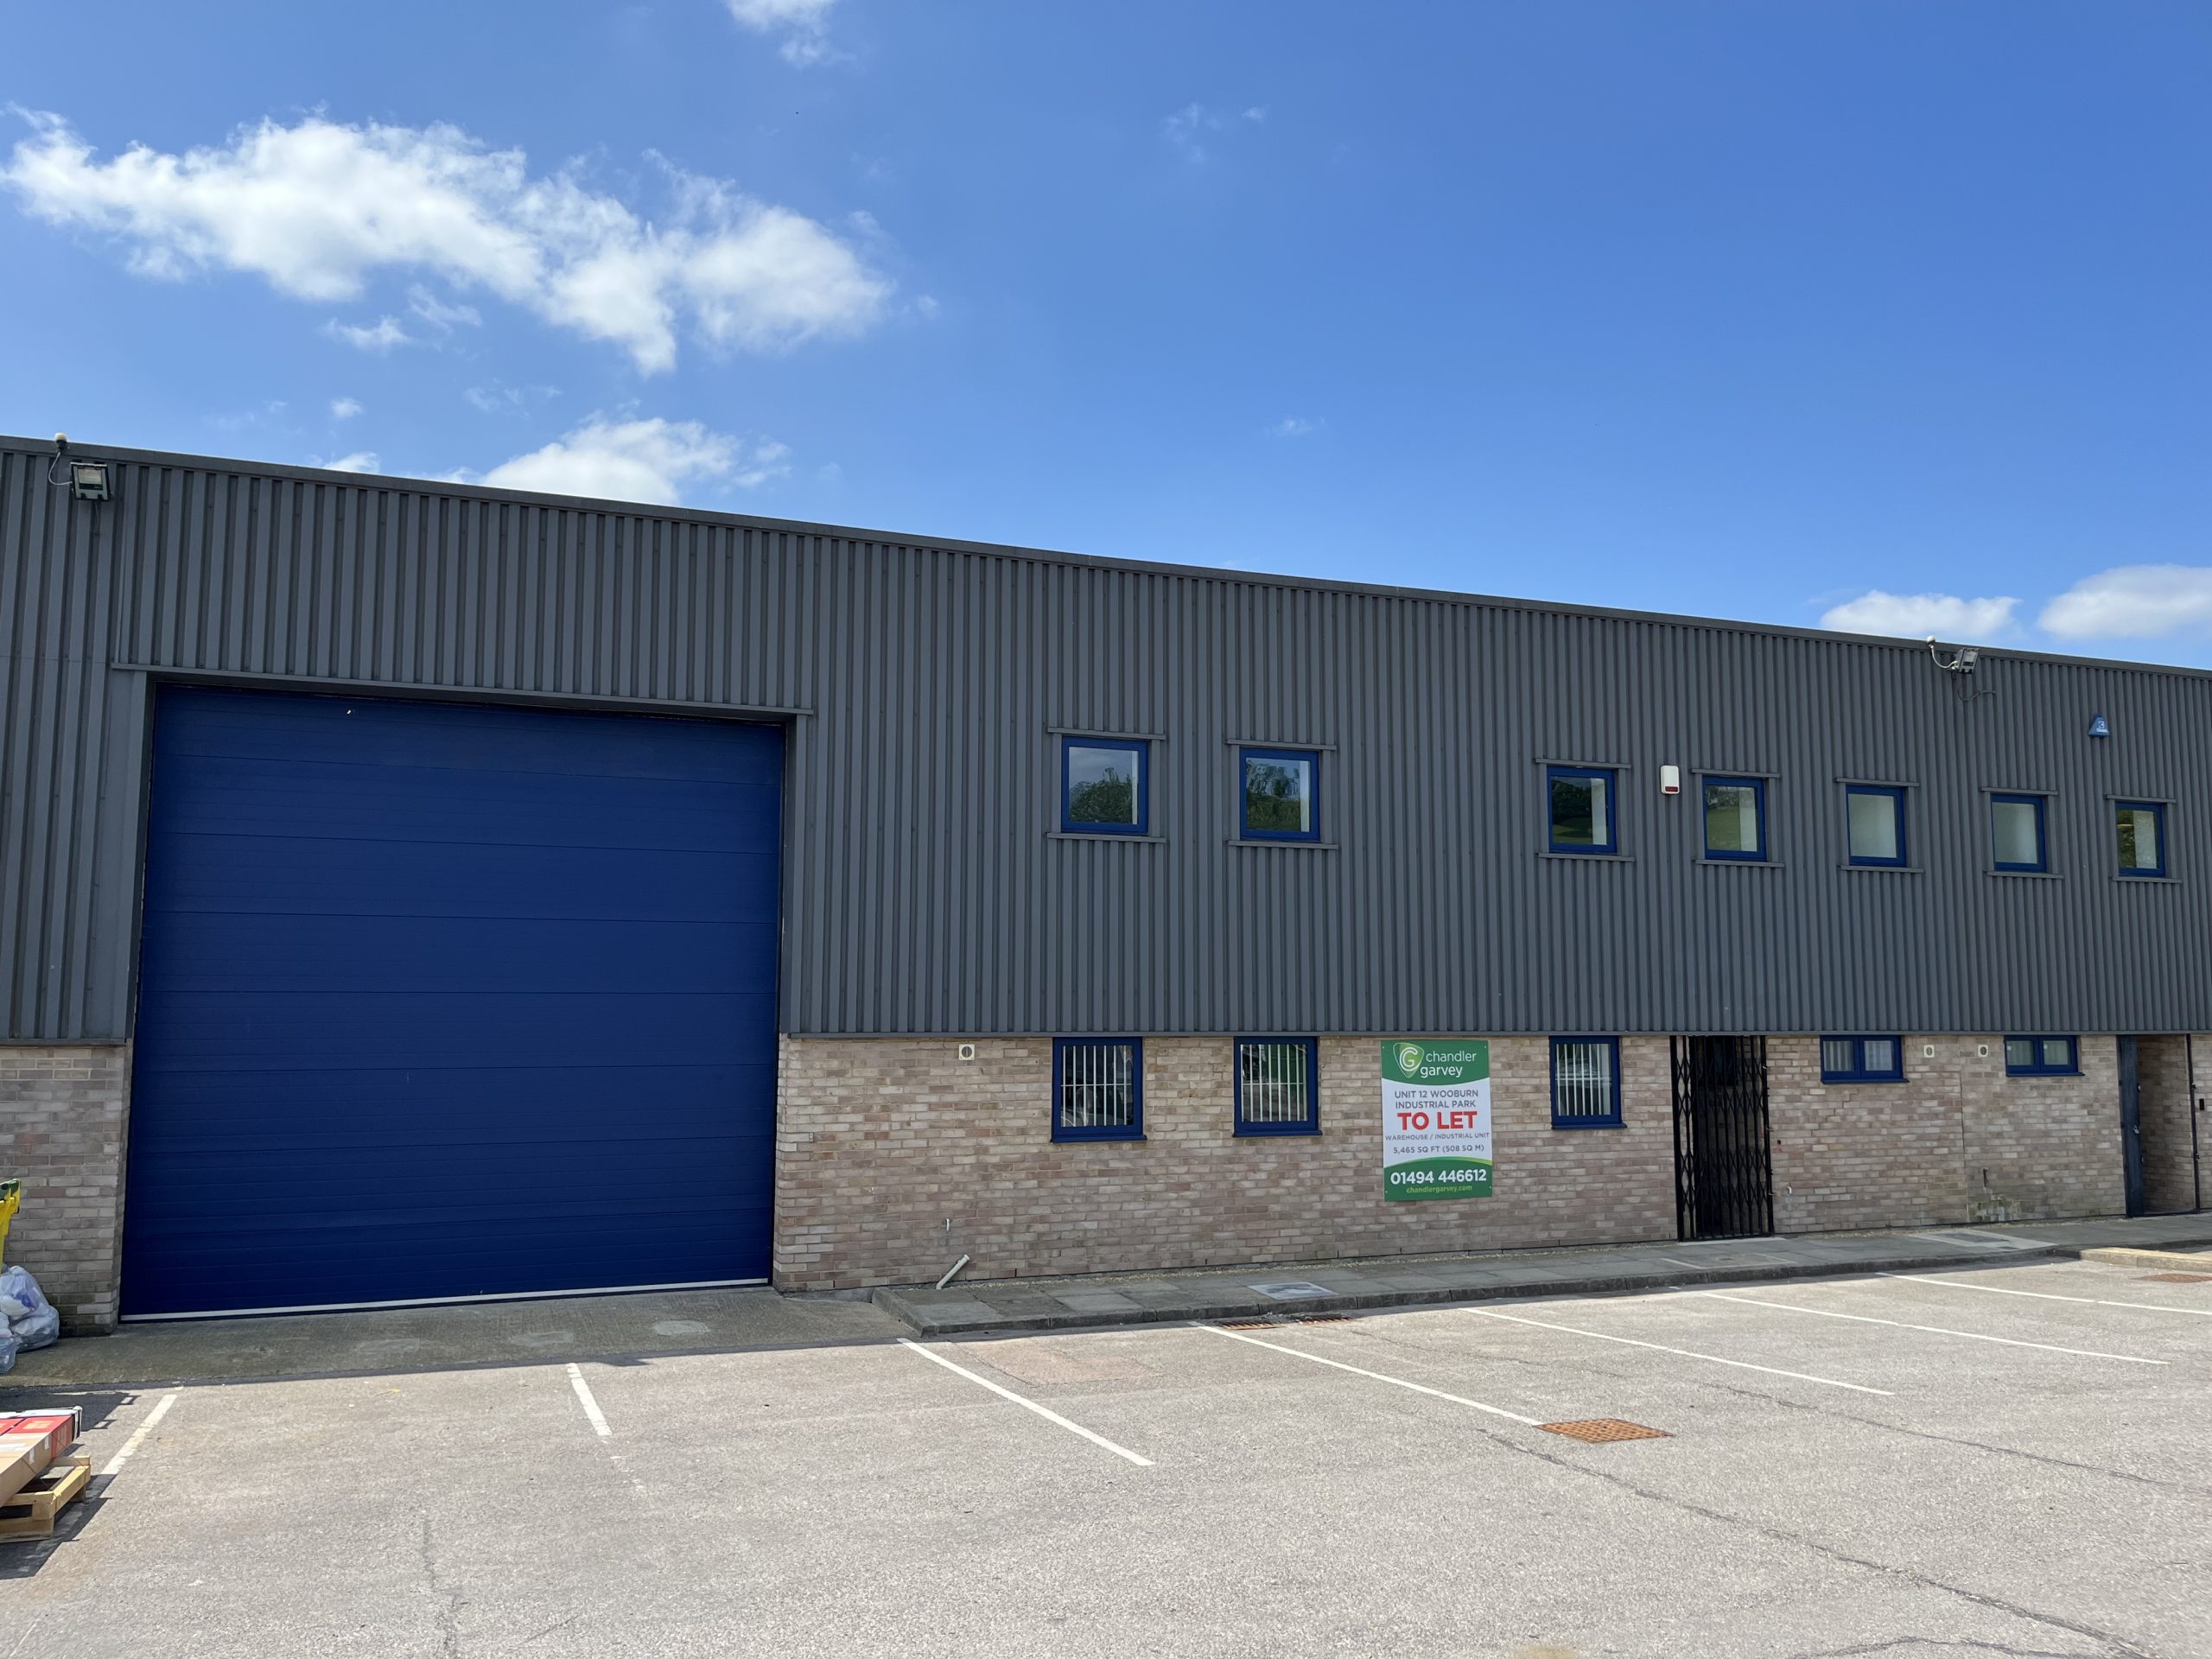 Industrial / warehouse units to let in Wooburn Green, High Wycombe.